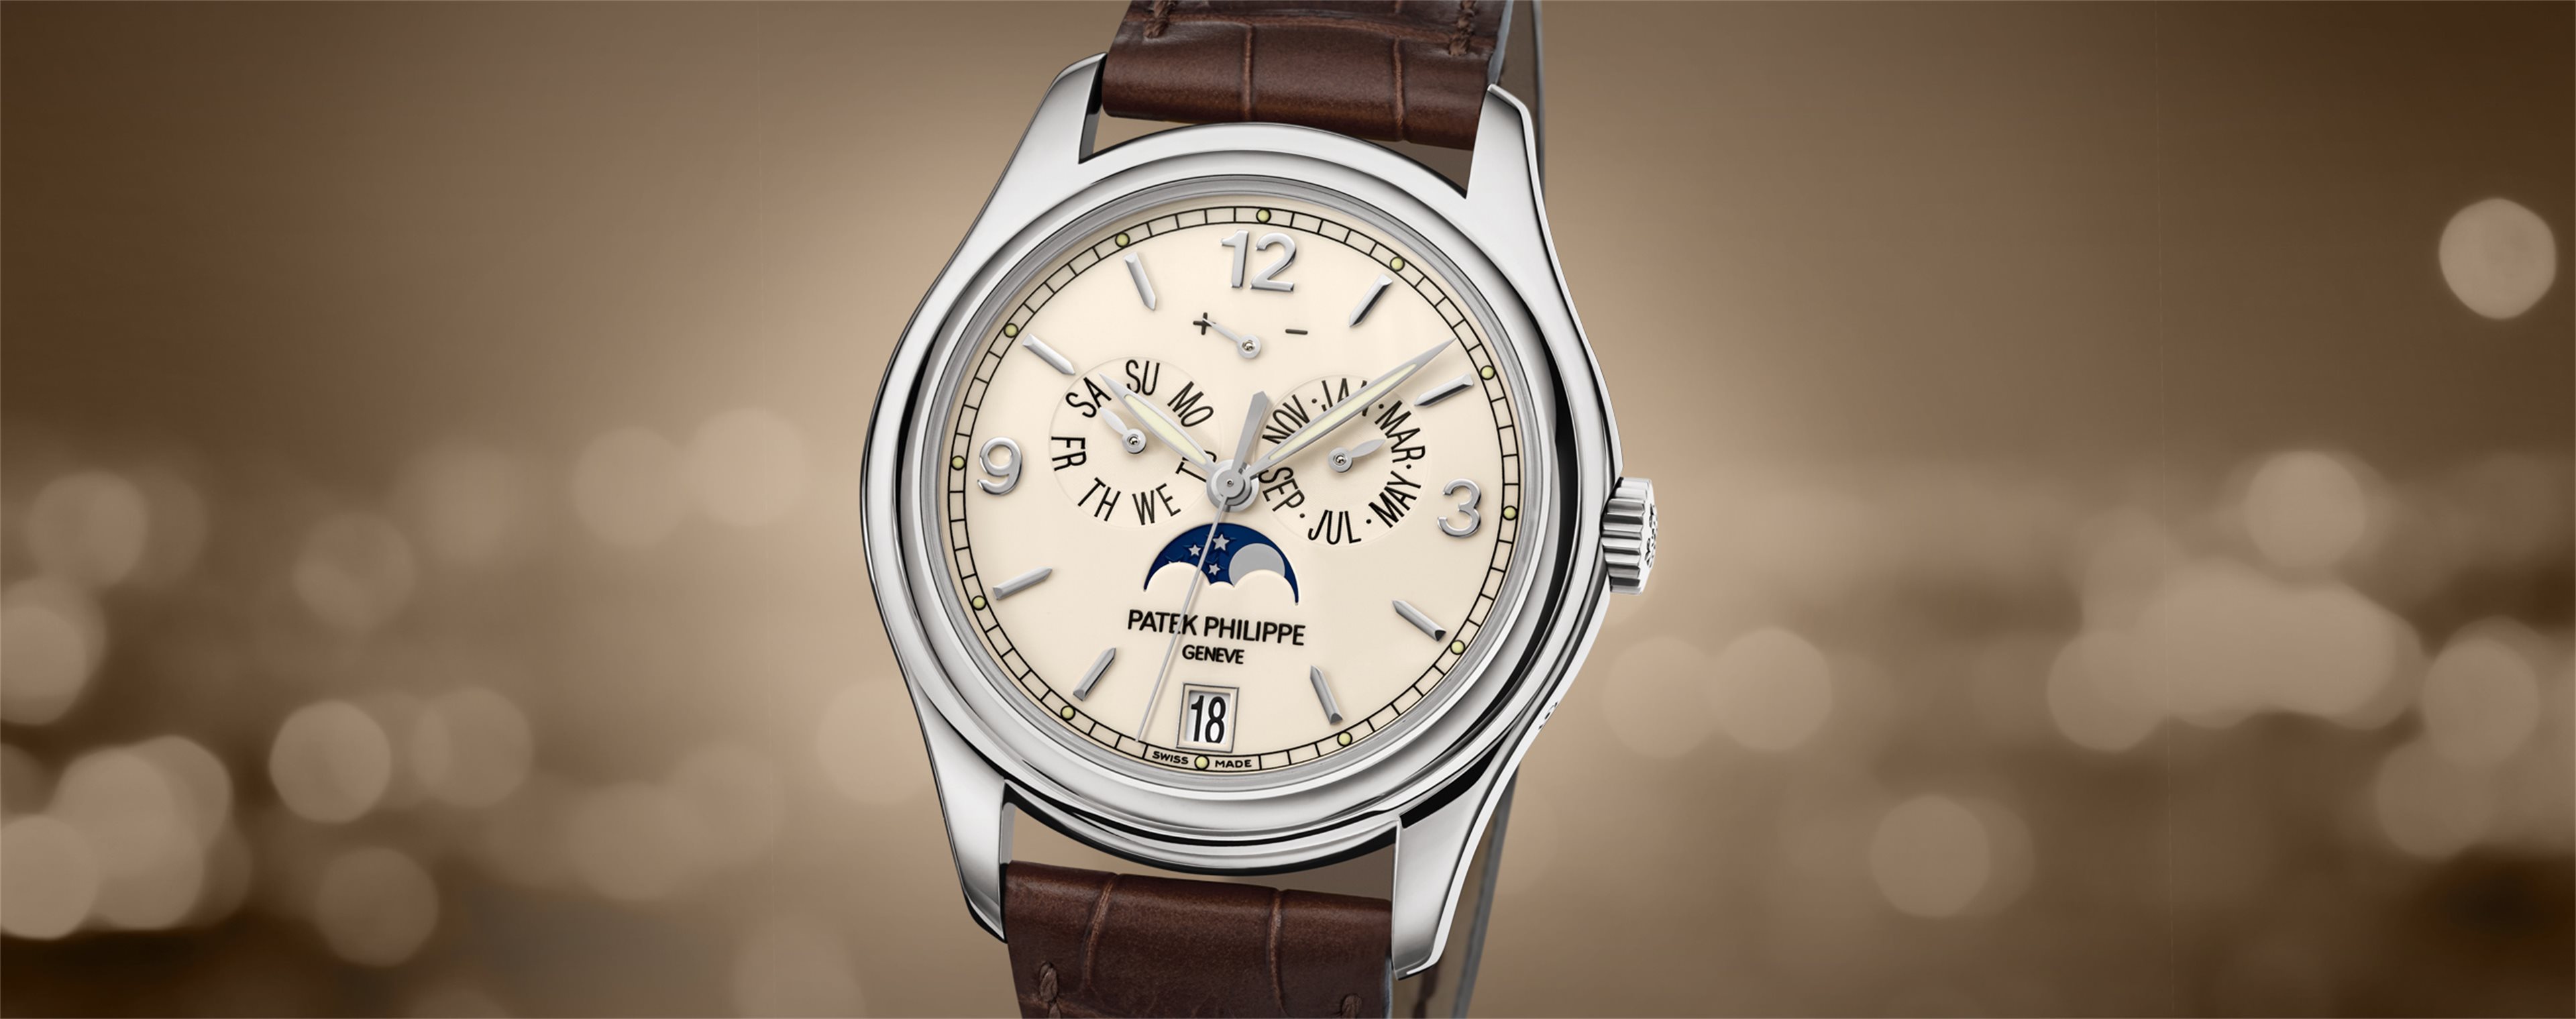 Patek Philippe Reference 5950 | A Stainless Steel Split Seconds Single Button Chronograph Wristwatch, Circa 2013 | Patek Philippe | Reference 5950 | Stainless Steel Split Seconds Single Button Chronograph Wristwatch, Circa 2013